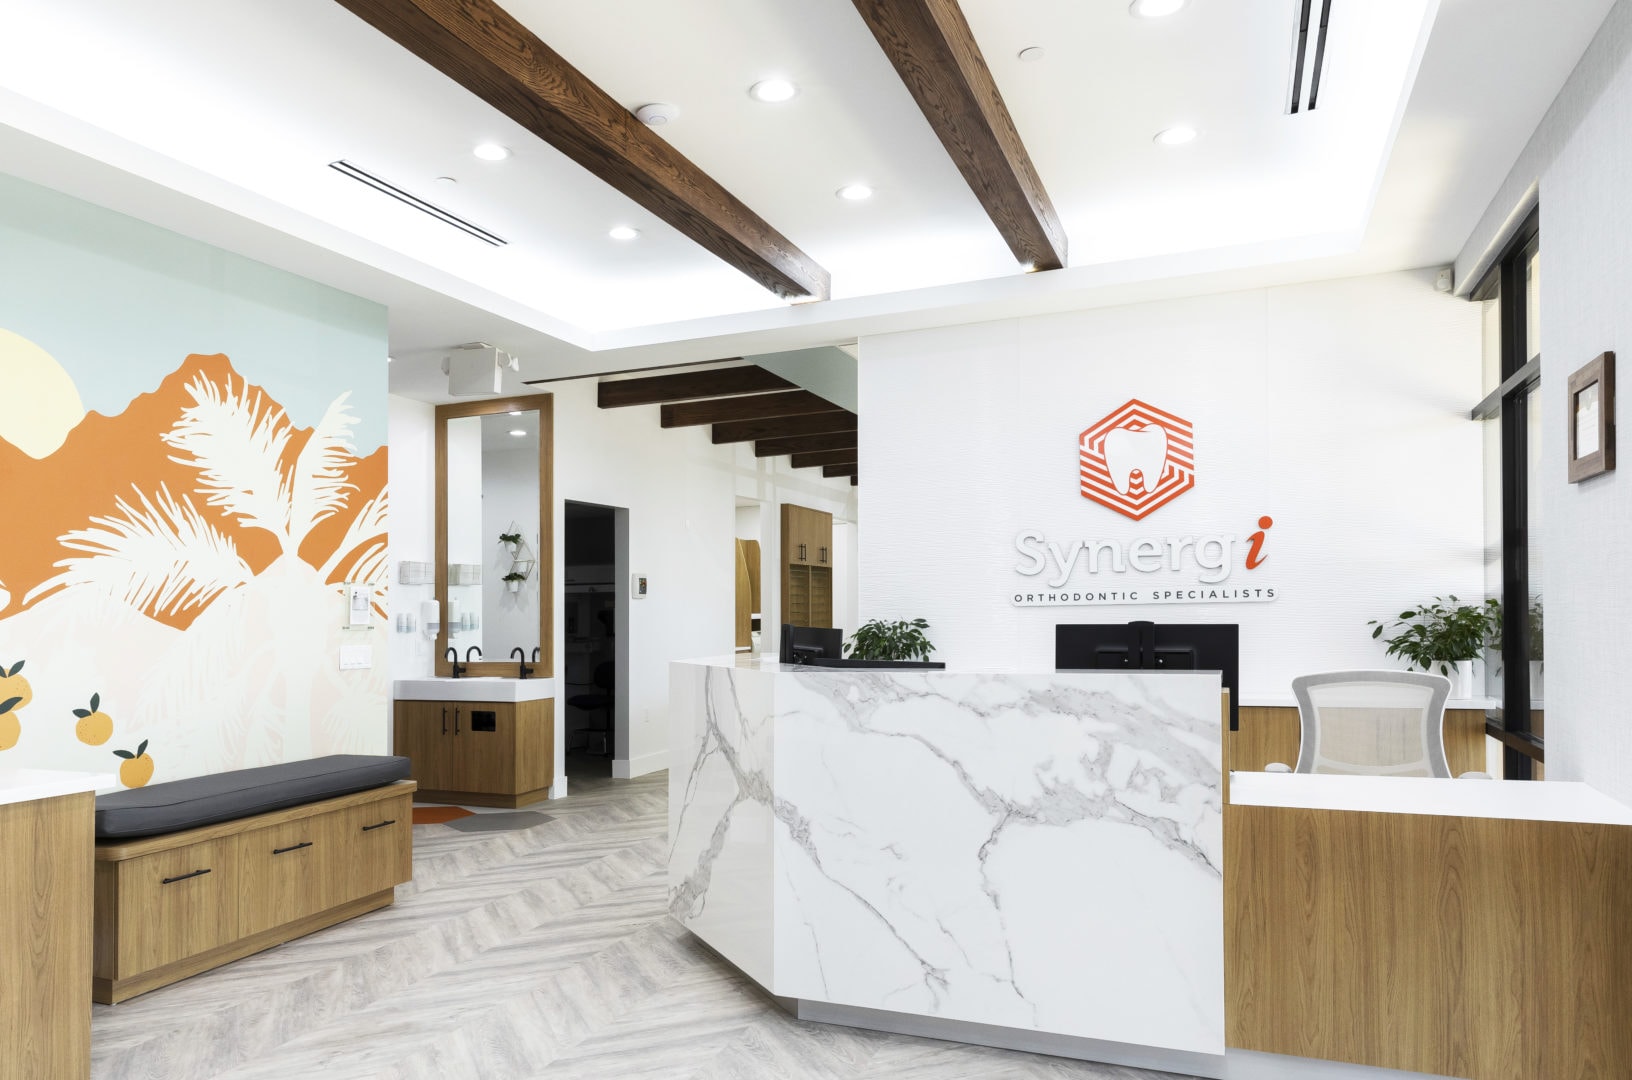 Interior view of Synergi Orthodontic Specialists including a reception desk on the right and a mural depicting citrus groves on the left.